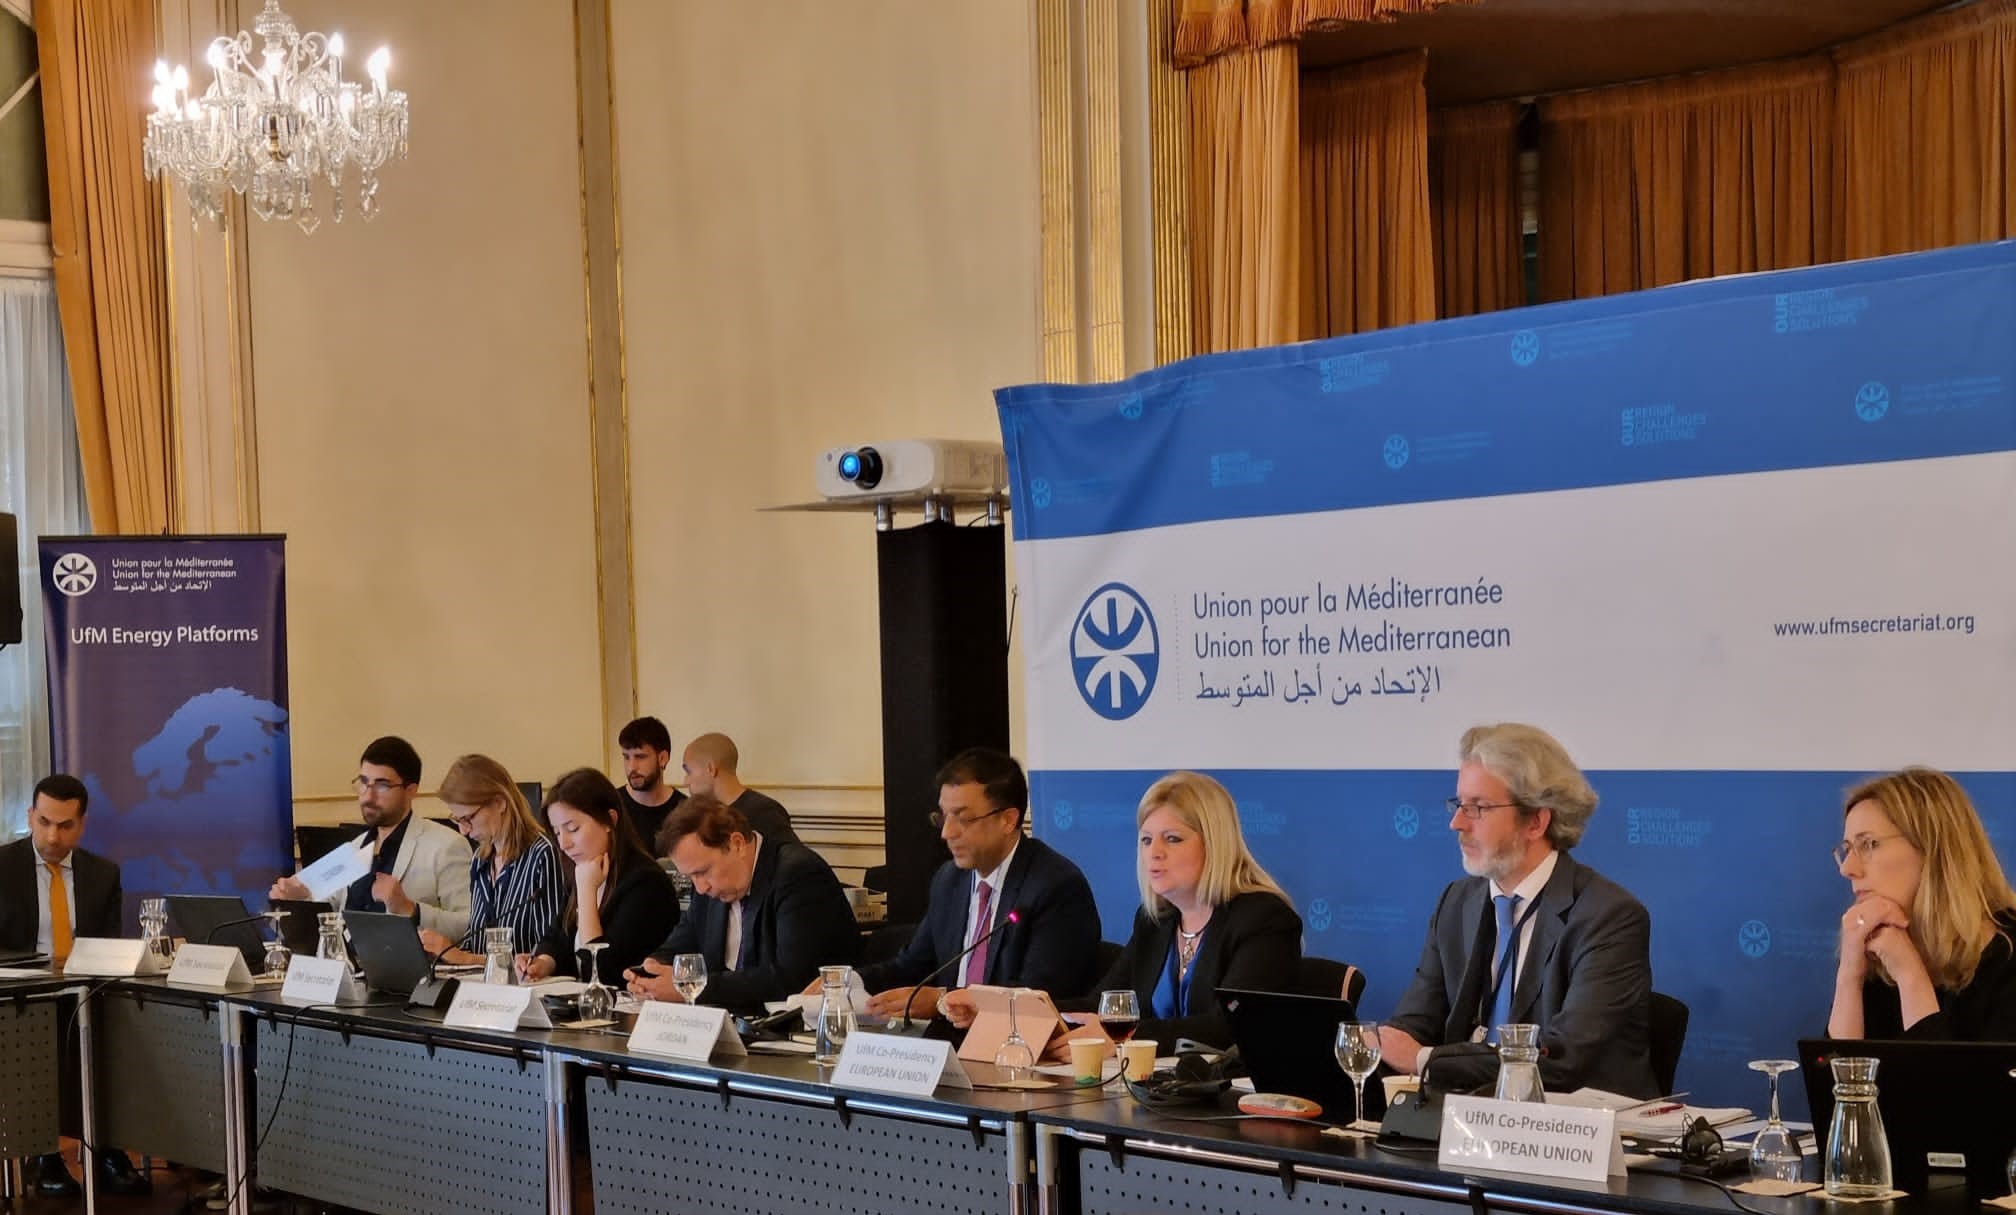 The CIHEAM and the UfM reaffirm their determination to strengthen their cooperation